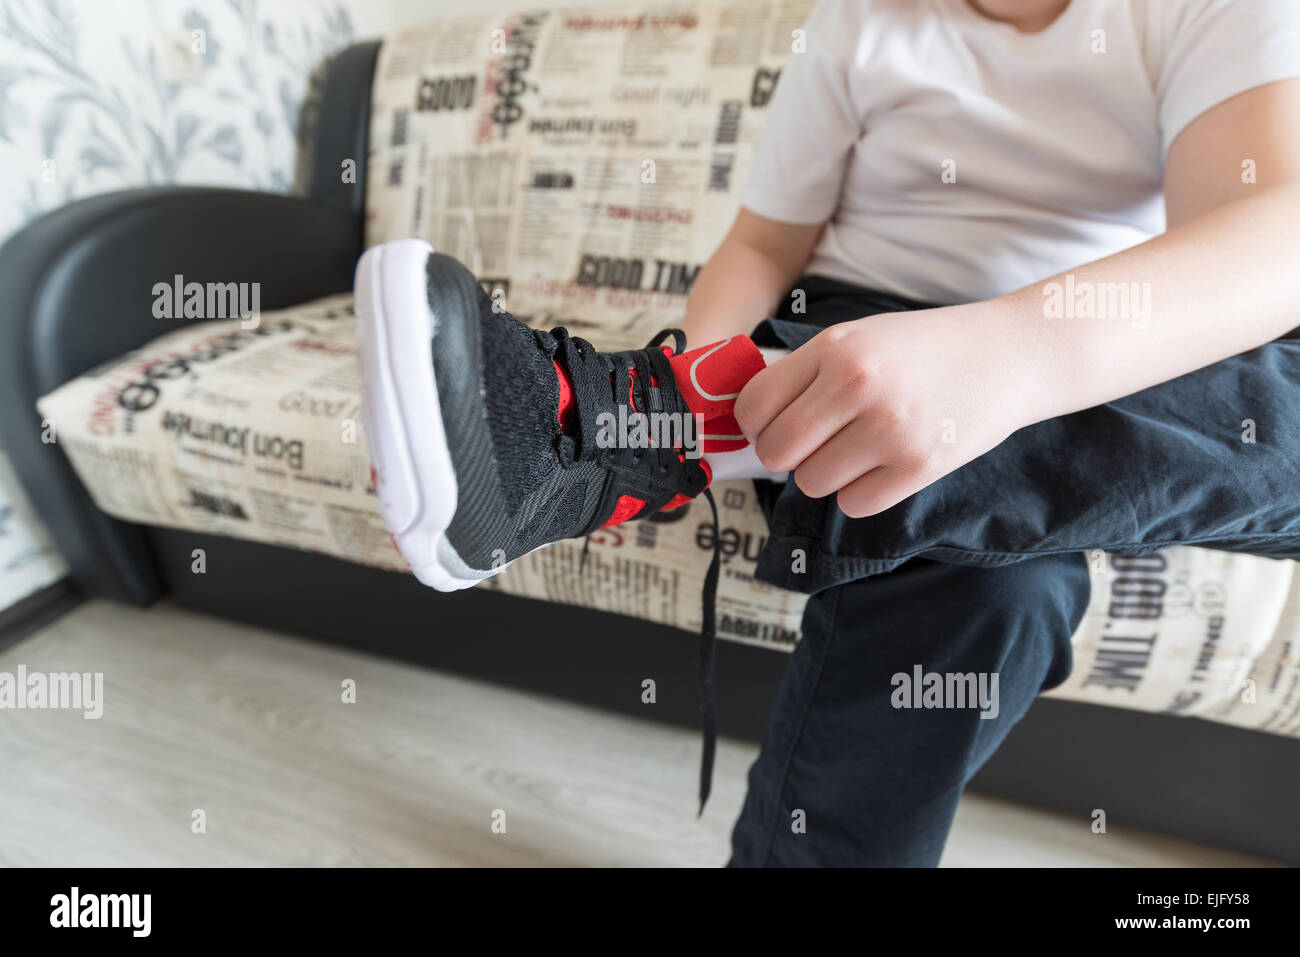 The boy wears running shoes sitting on a sofa in  room Stock Photo